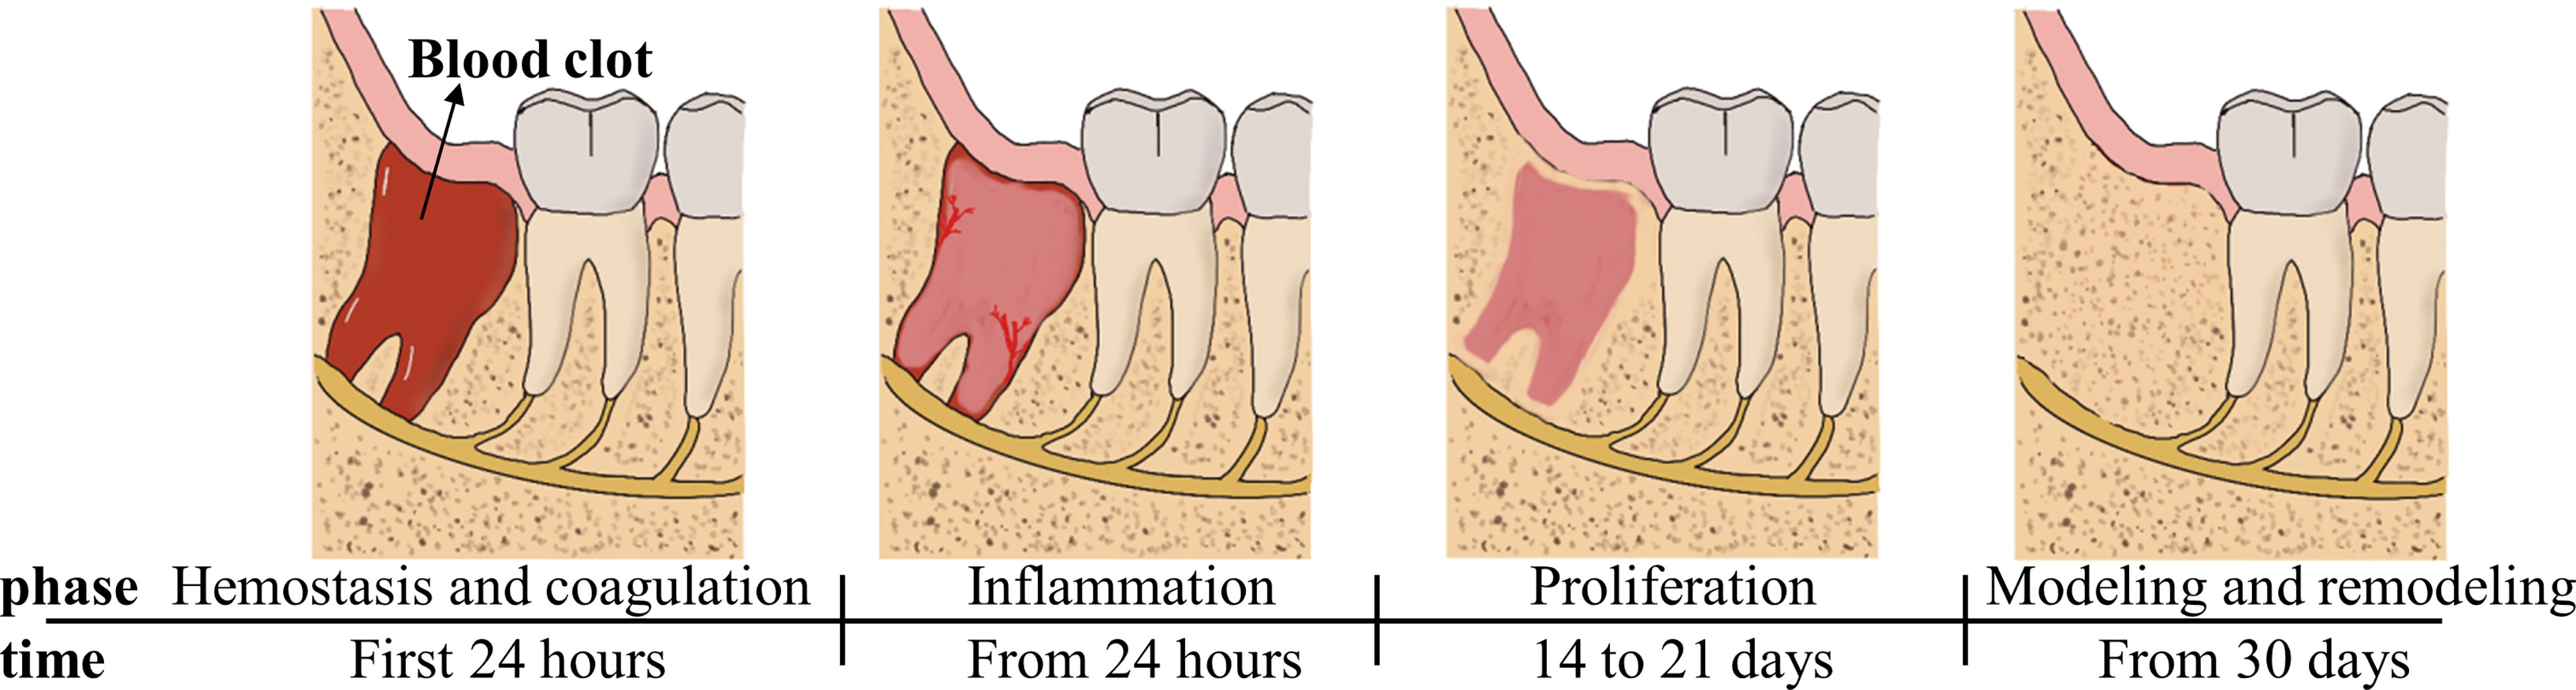 normal healing after tooth extraction